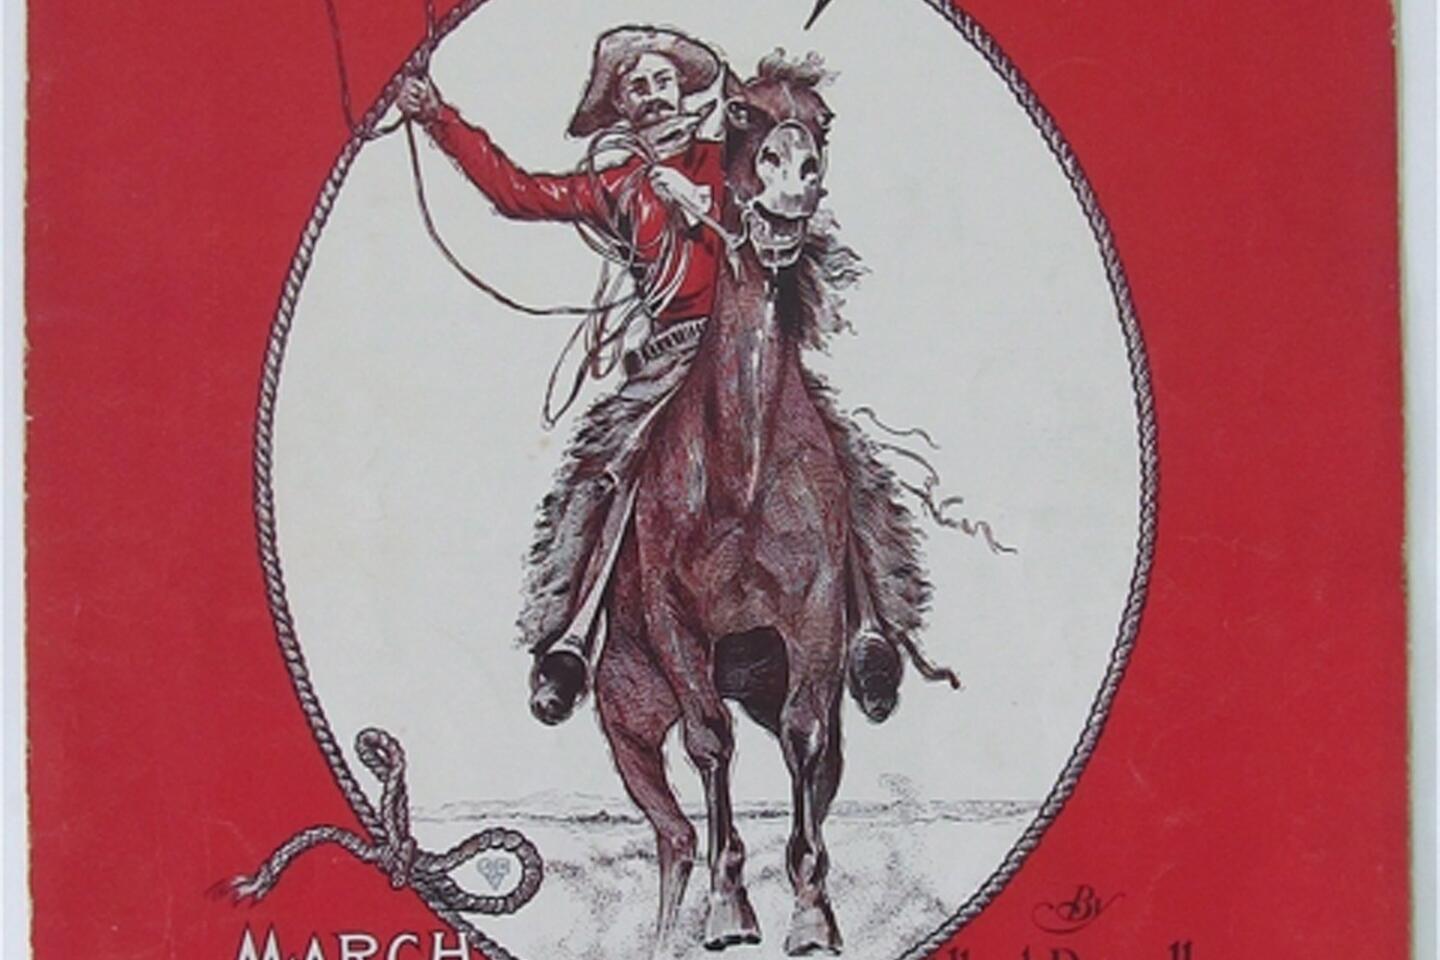 The cover for the sheet music "Across the Plains," composed by Albert Russell, 1905 or 1908. The sheet music is part of the 2013 book, "Songs in the Key of Los Angeles: Sheet Music From the Collection of the Los Angeles Public Library."